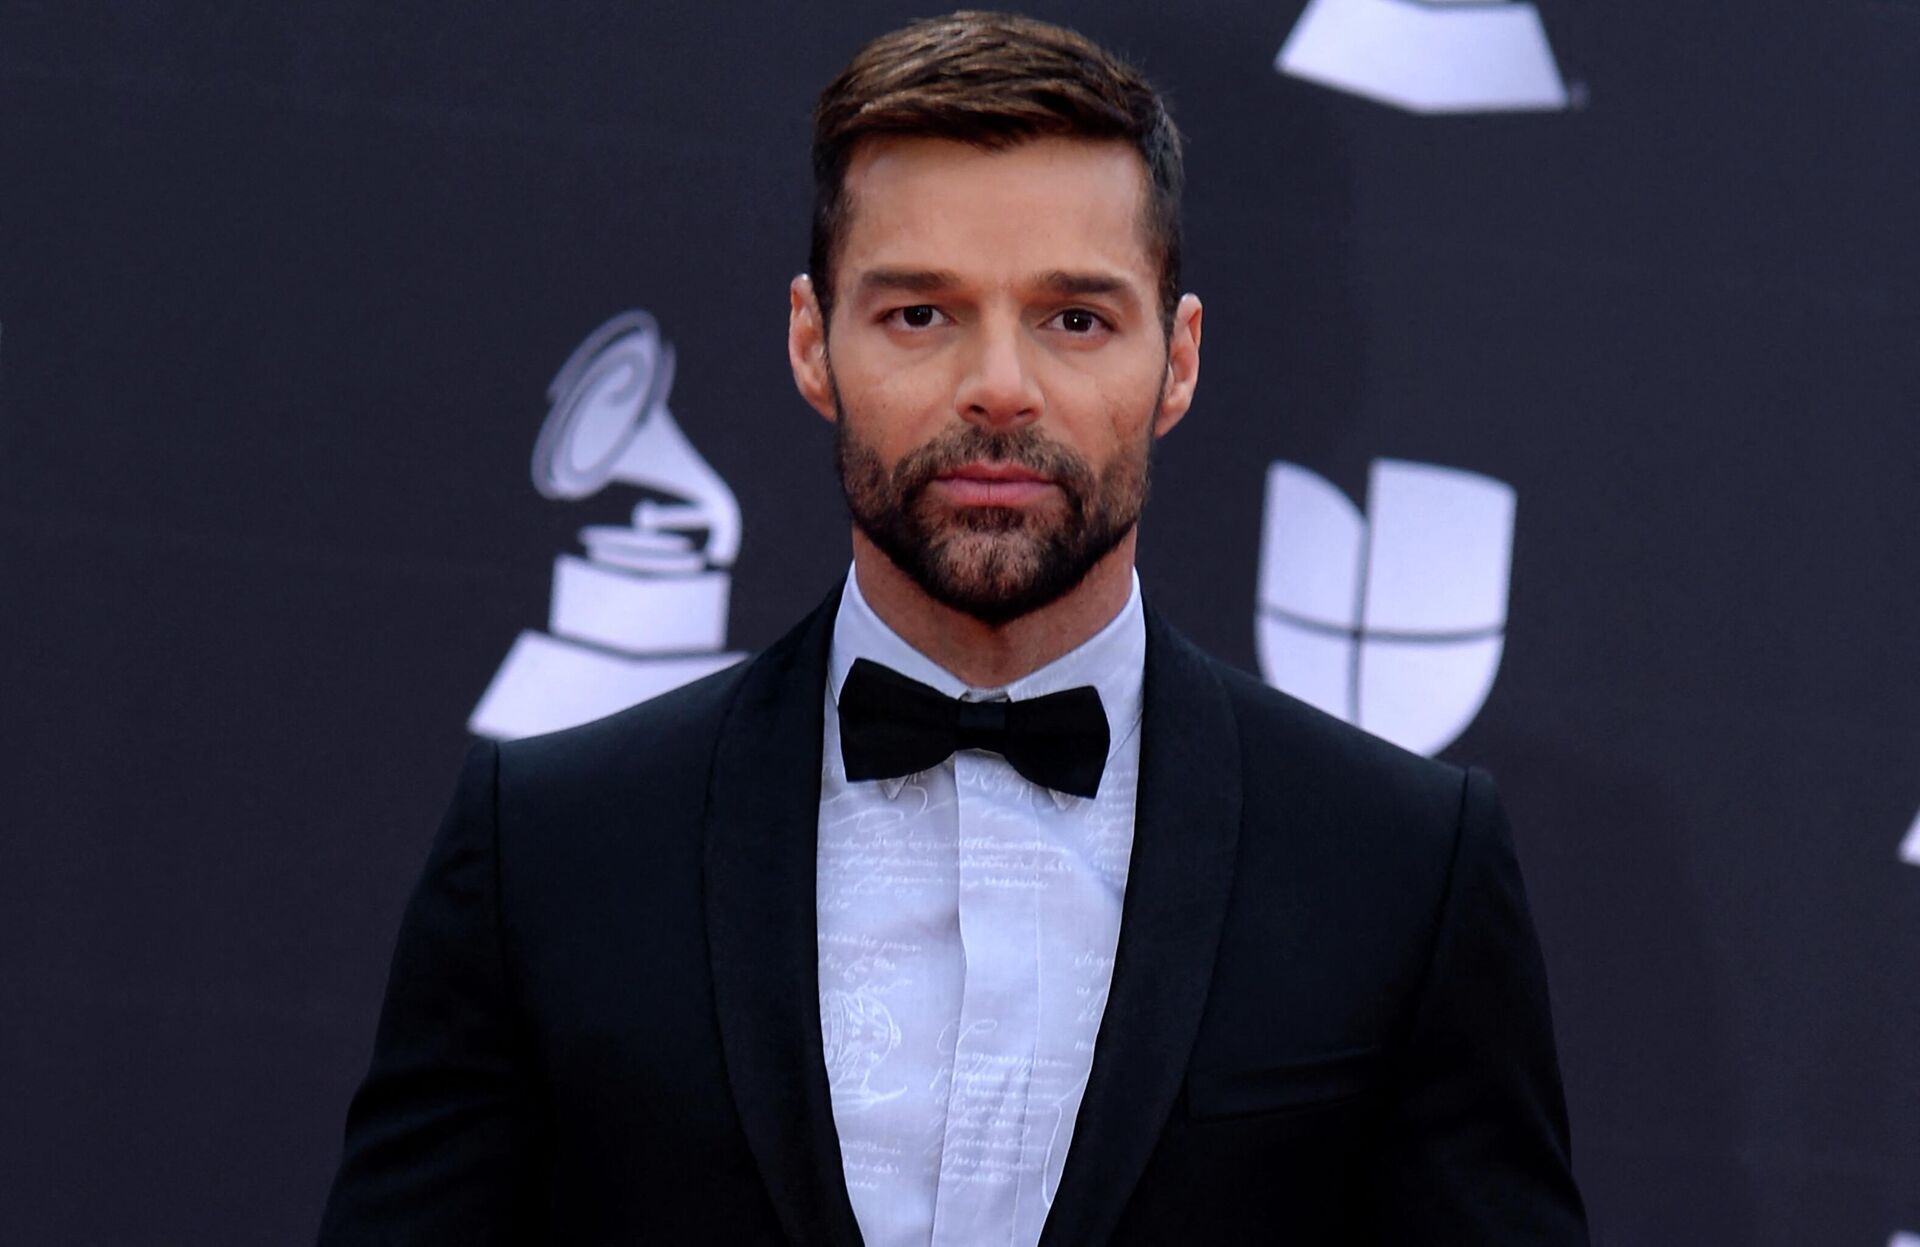 In this file photo taken on November 14, 2019 Puerto Rican musician and host Ricky Martin arrives at the 20th Annual Latin Grammy Awards in Las Vegas, Nevada. - Sputnik International, 1920, 17.07.2022